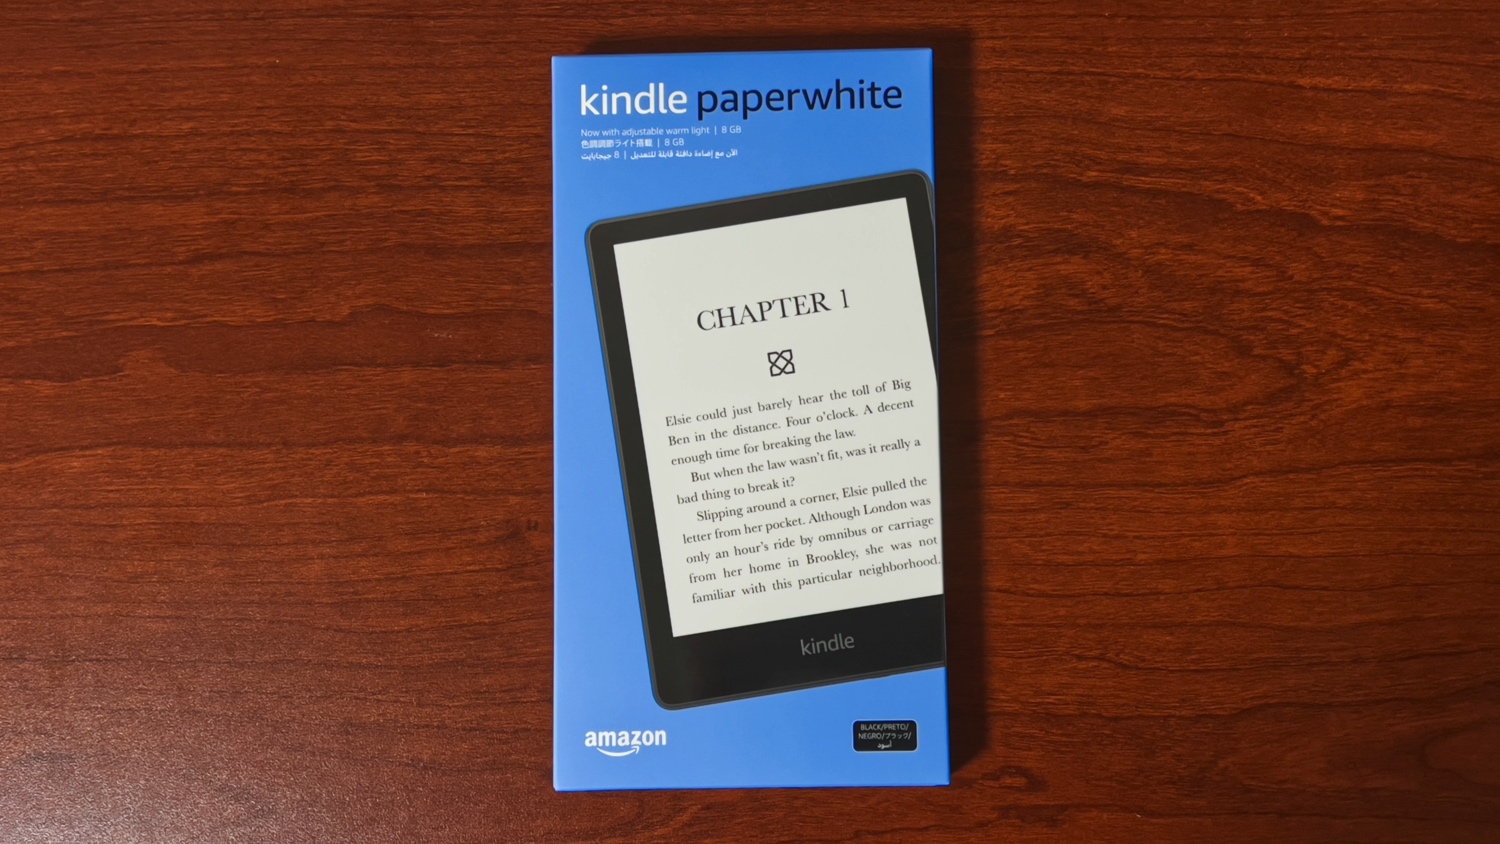 Kindle Paperwhite 11th 2021